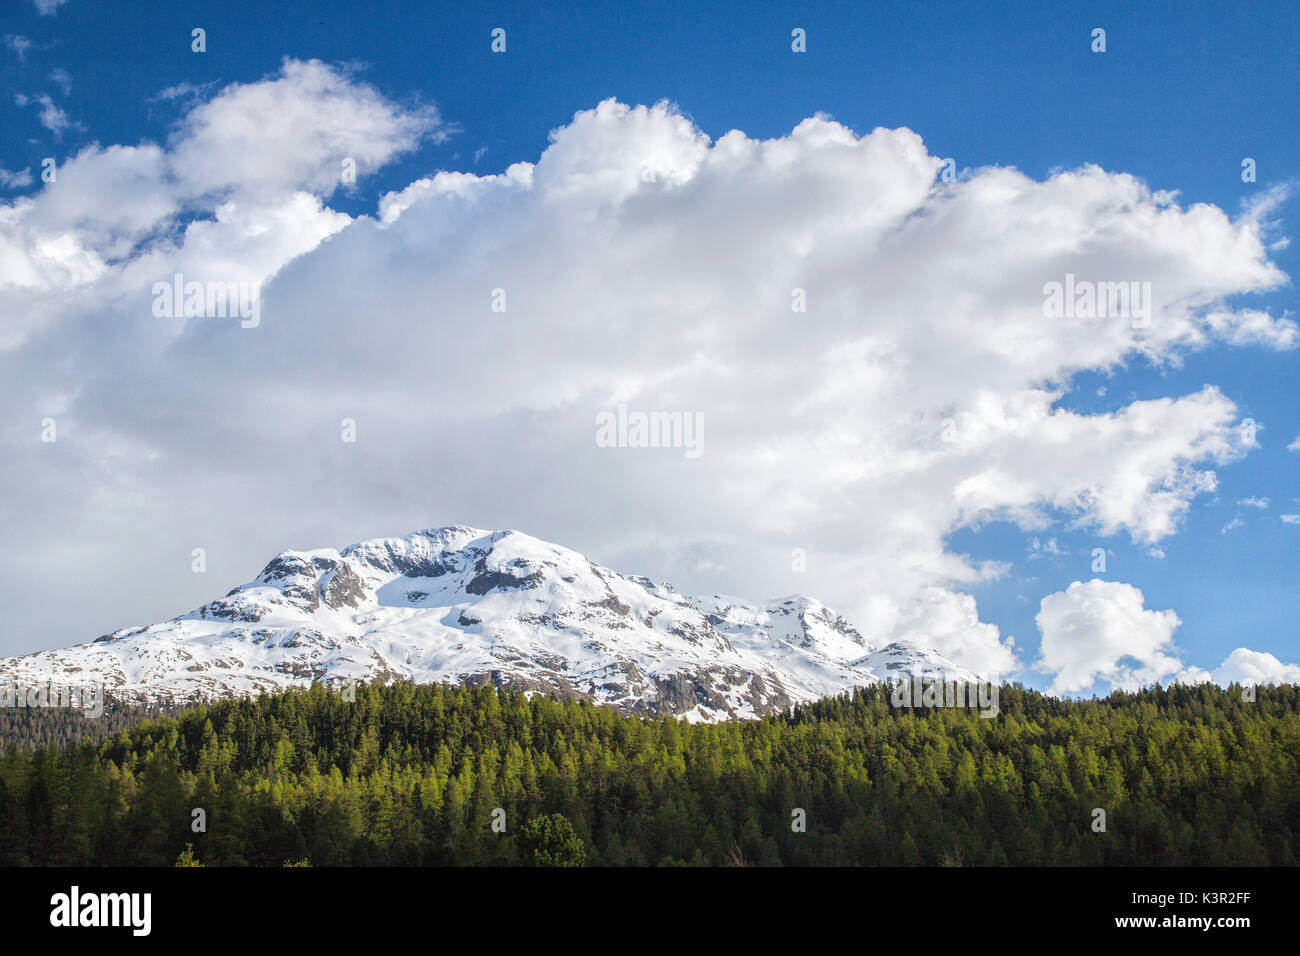 Snow capped mountains and green woods at spring Canton of Graubünden Engadine Switzerland Europe Stock Photo